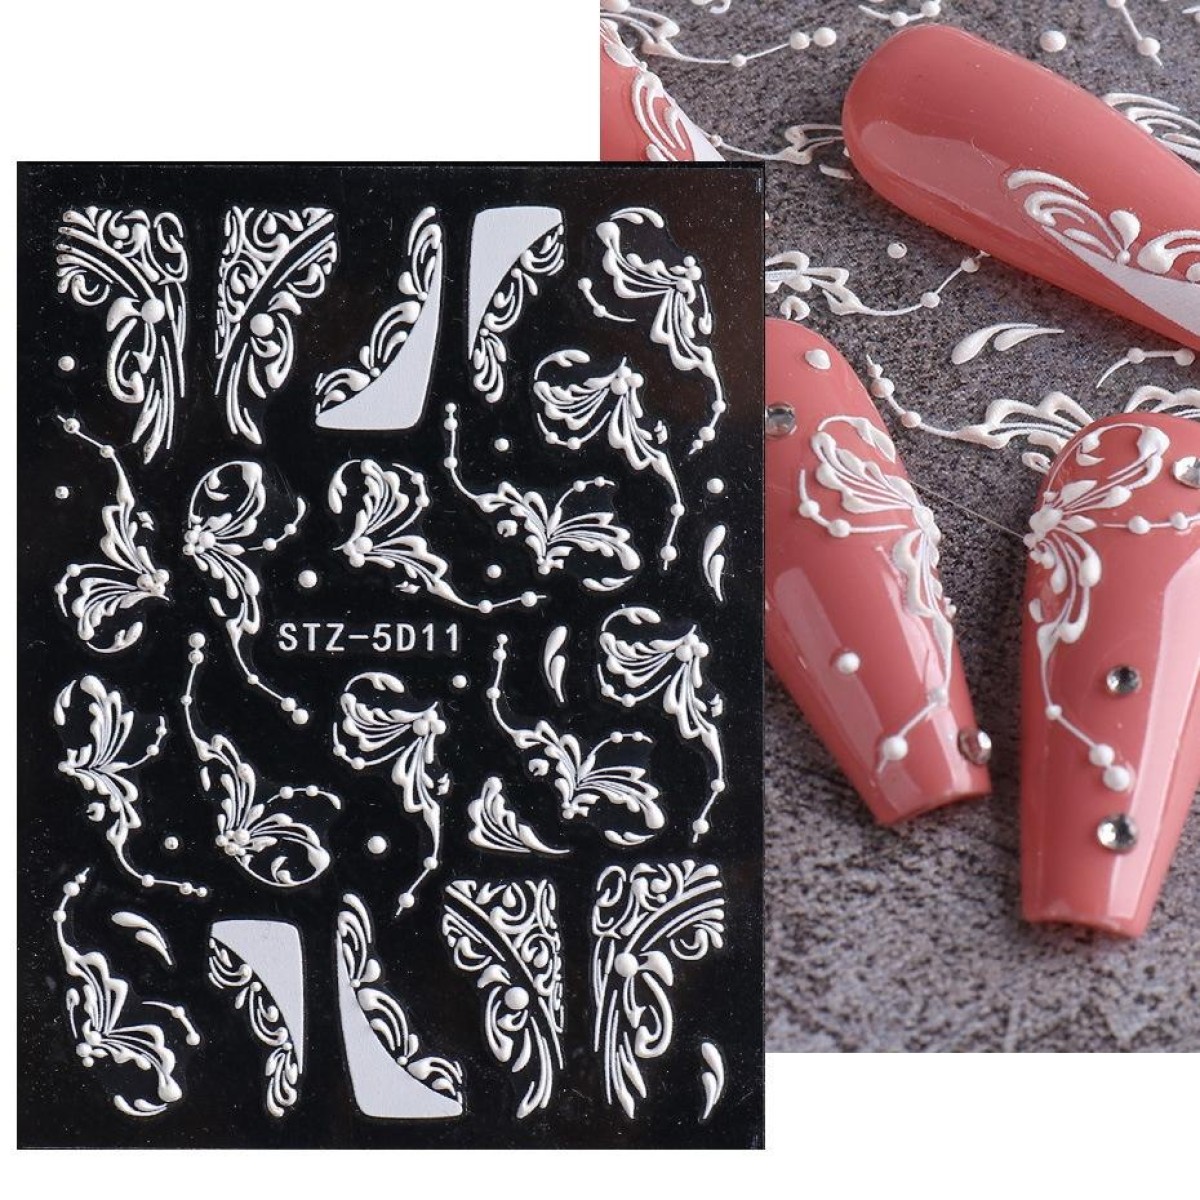 5D Three-dimensional Carved Nail Art Stickers Rose Pattern Embossed Nail Stickers(Stz-5D11)